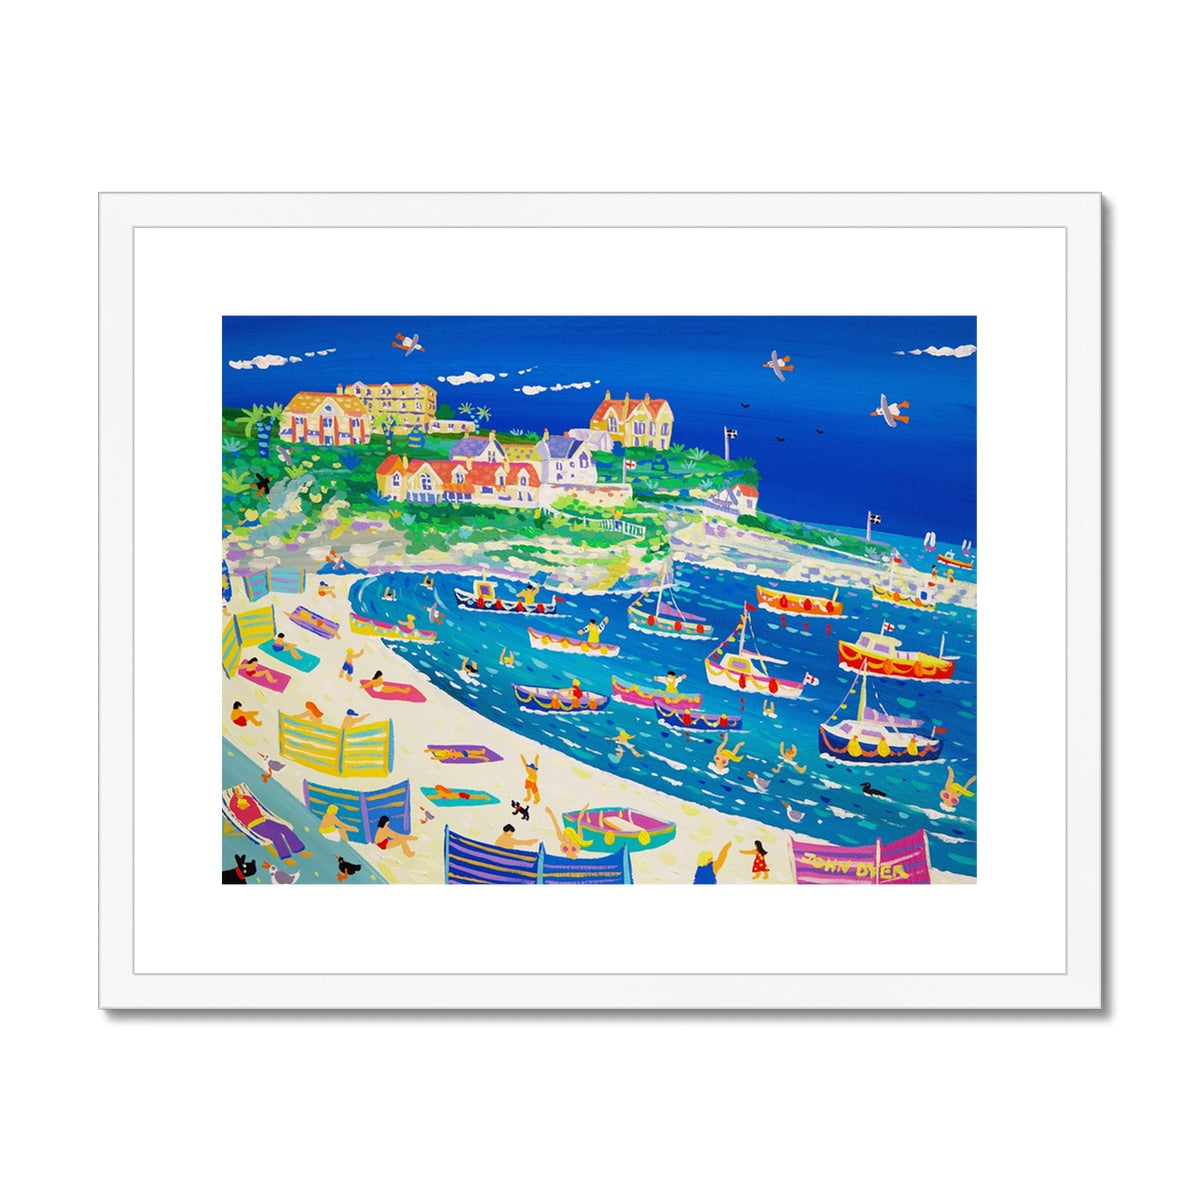 John Dyer Framed Open Edition Cornish Fine Art Print. 'Fun in the Harbour, Newquay'. Cornwall Art Gallery